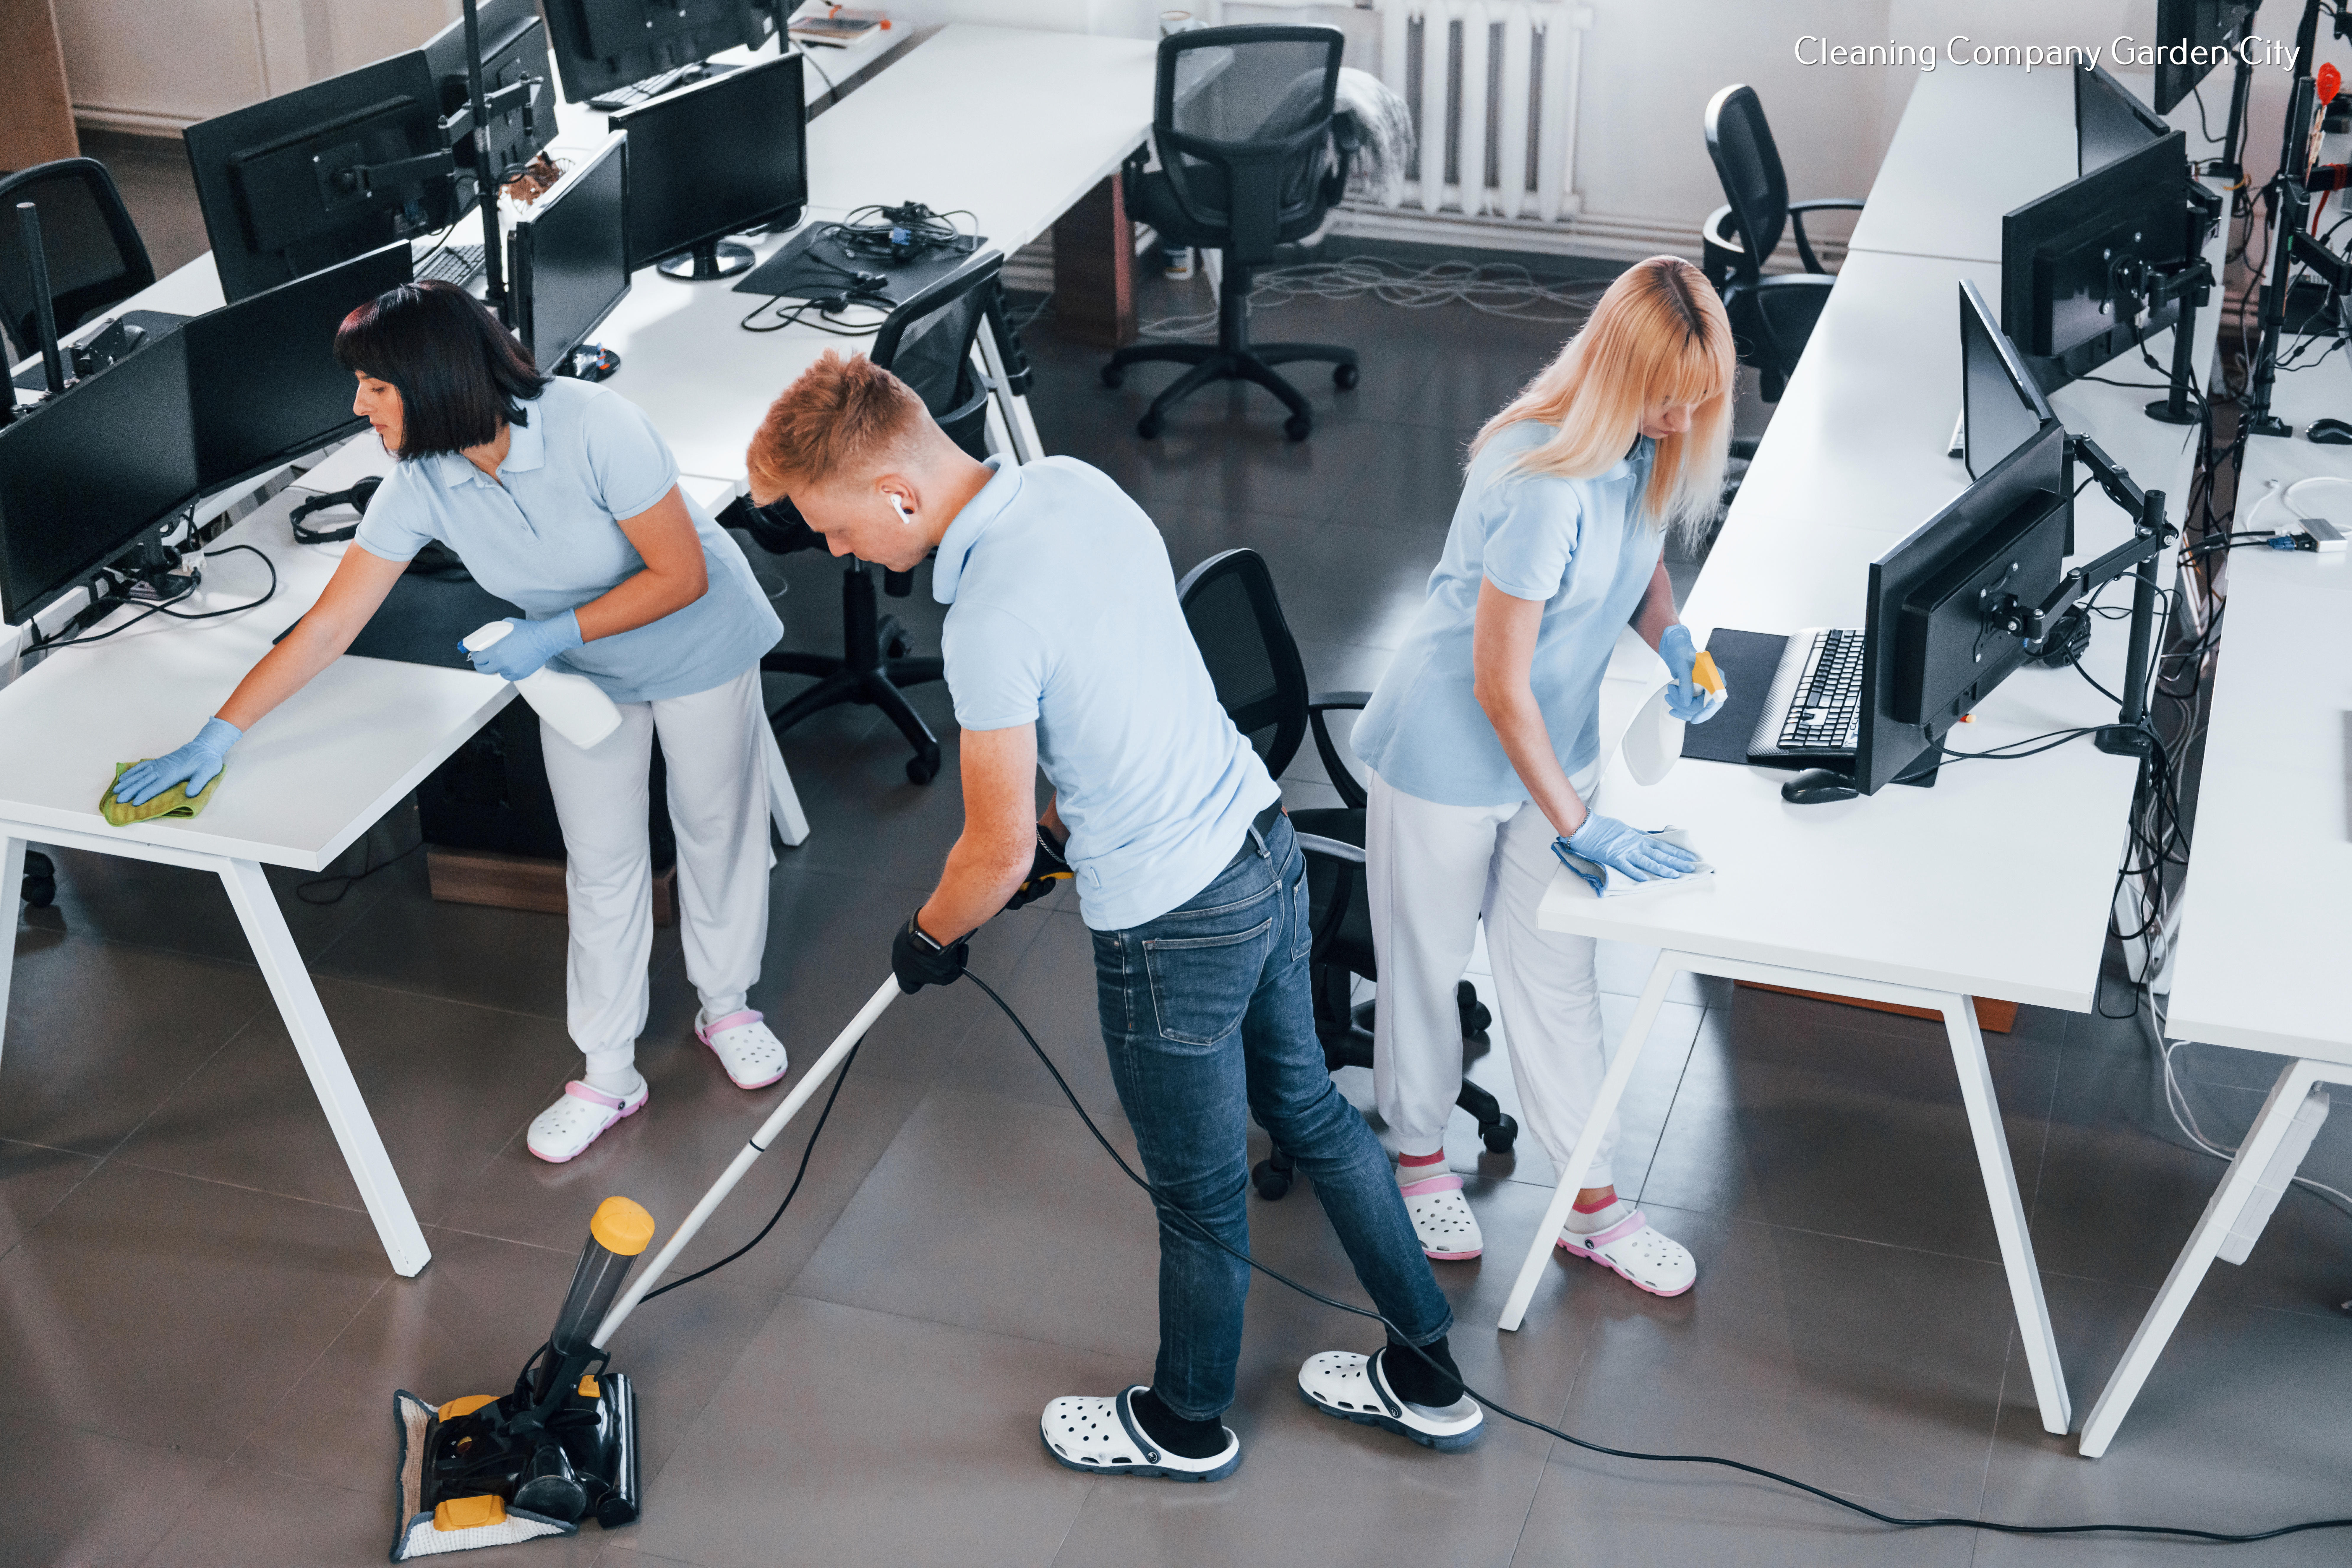 Above N' Beyond Office Cleaning, LLC Highlights the Traits of a Good Cleaning Company